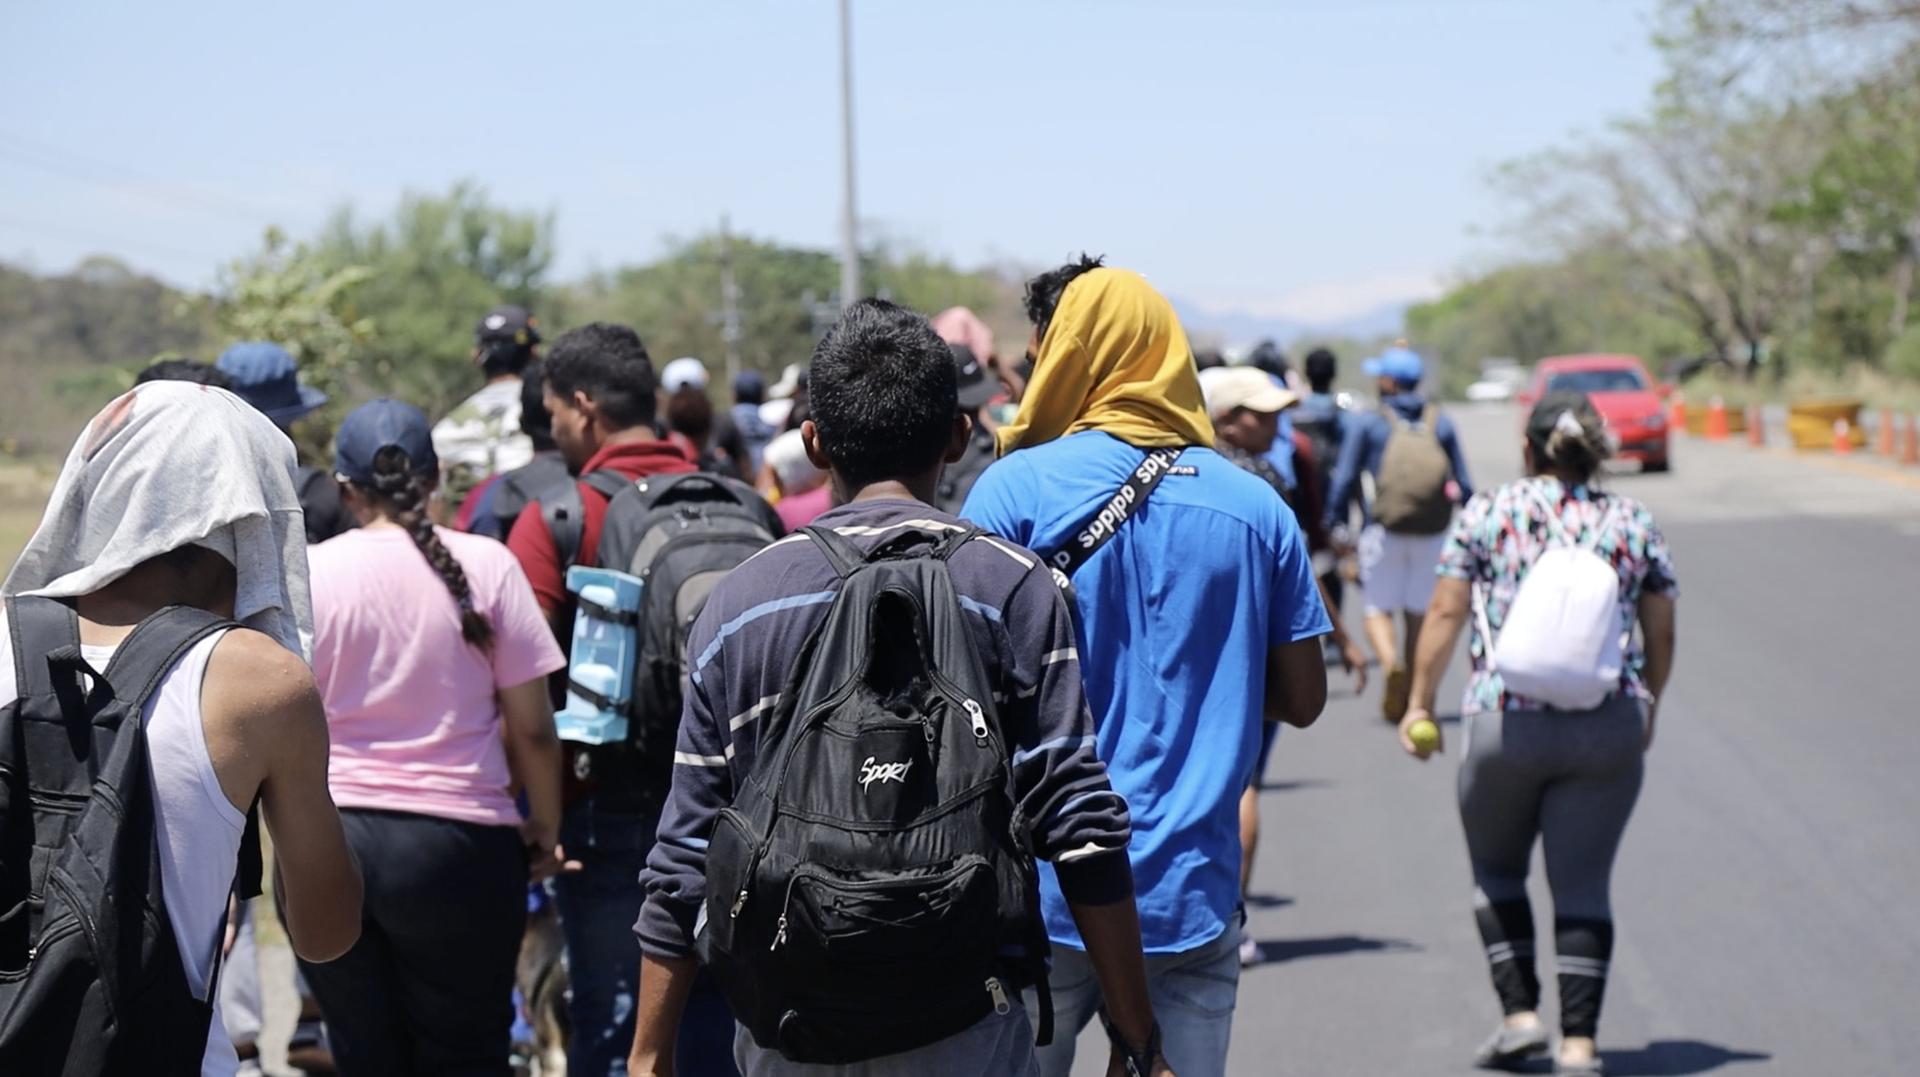 A photo showing the back side of a group of people walking in the heat on a desolate road